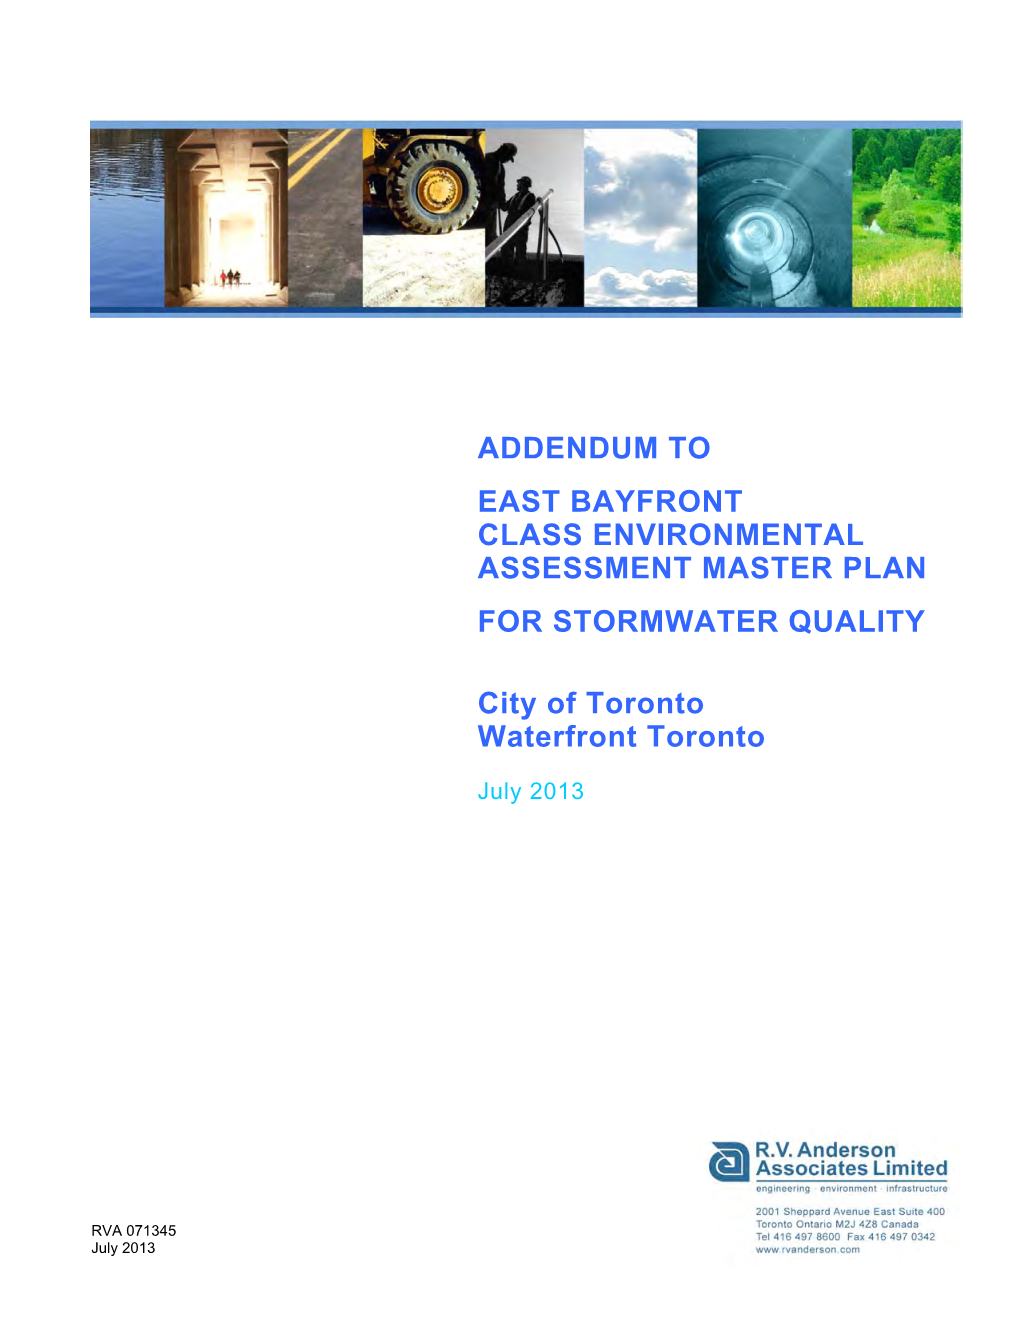 Addendum to East Bayfront Class EA Master Plan for Stormwater Quality